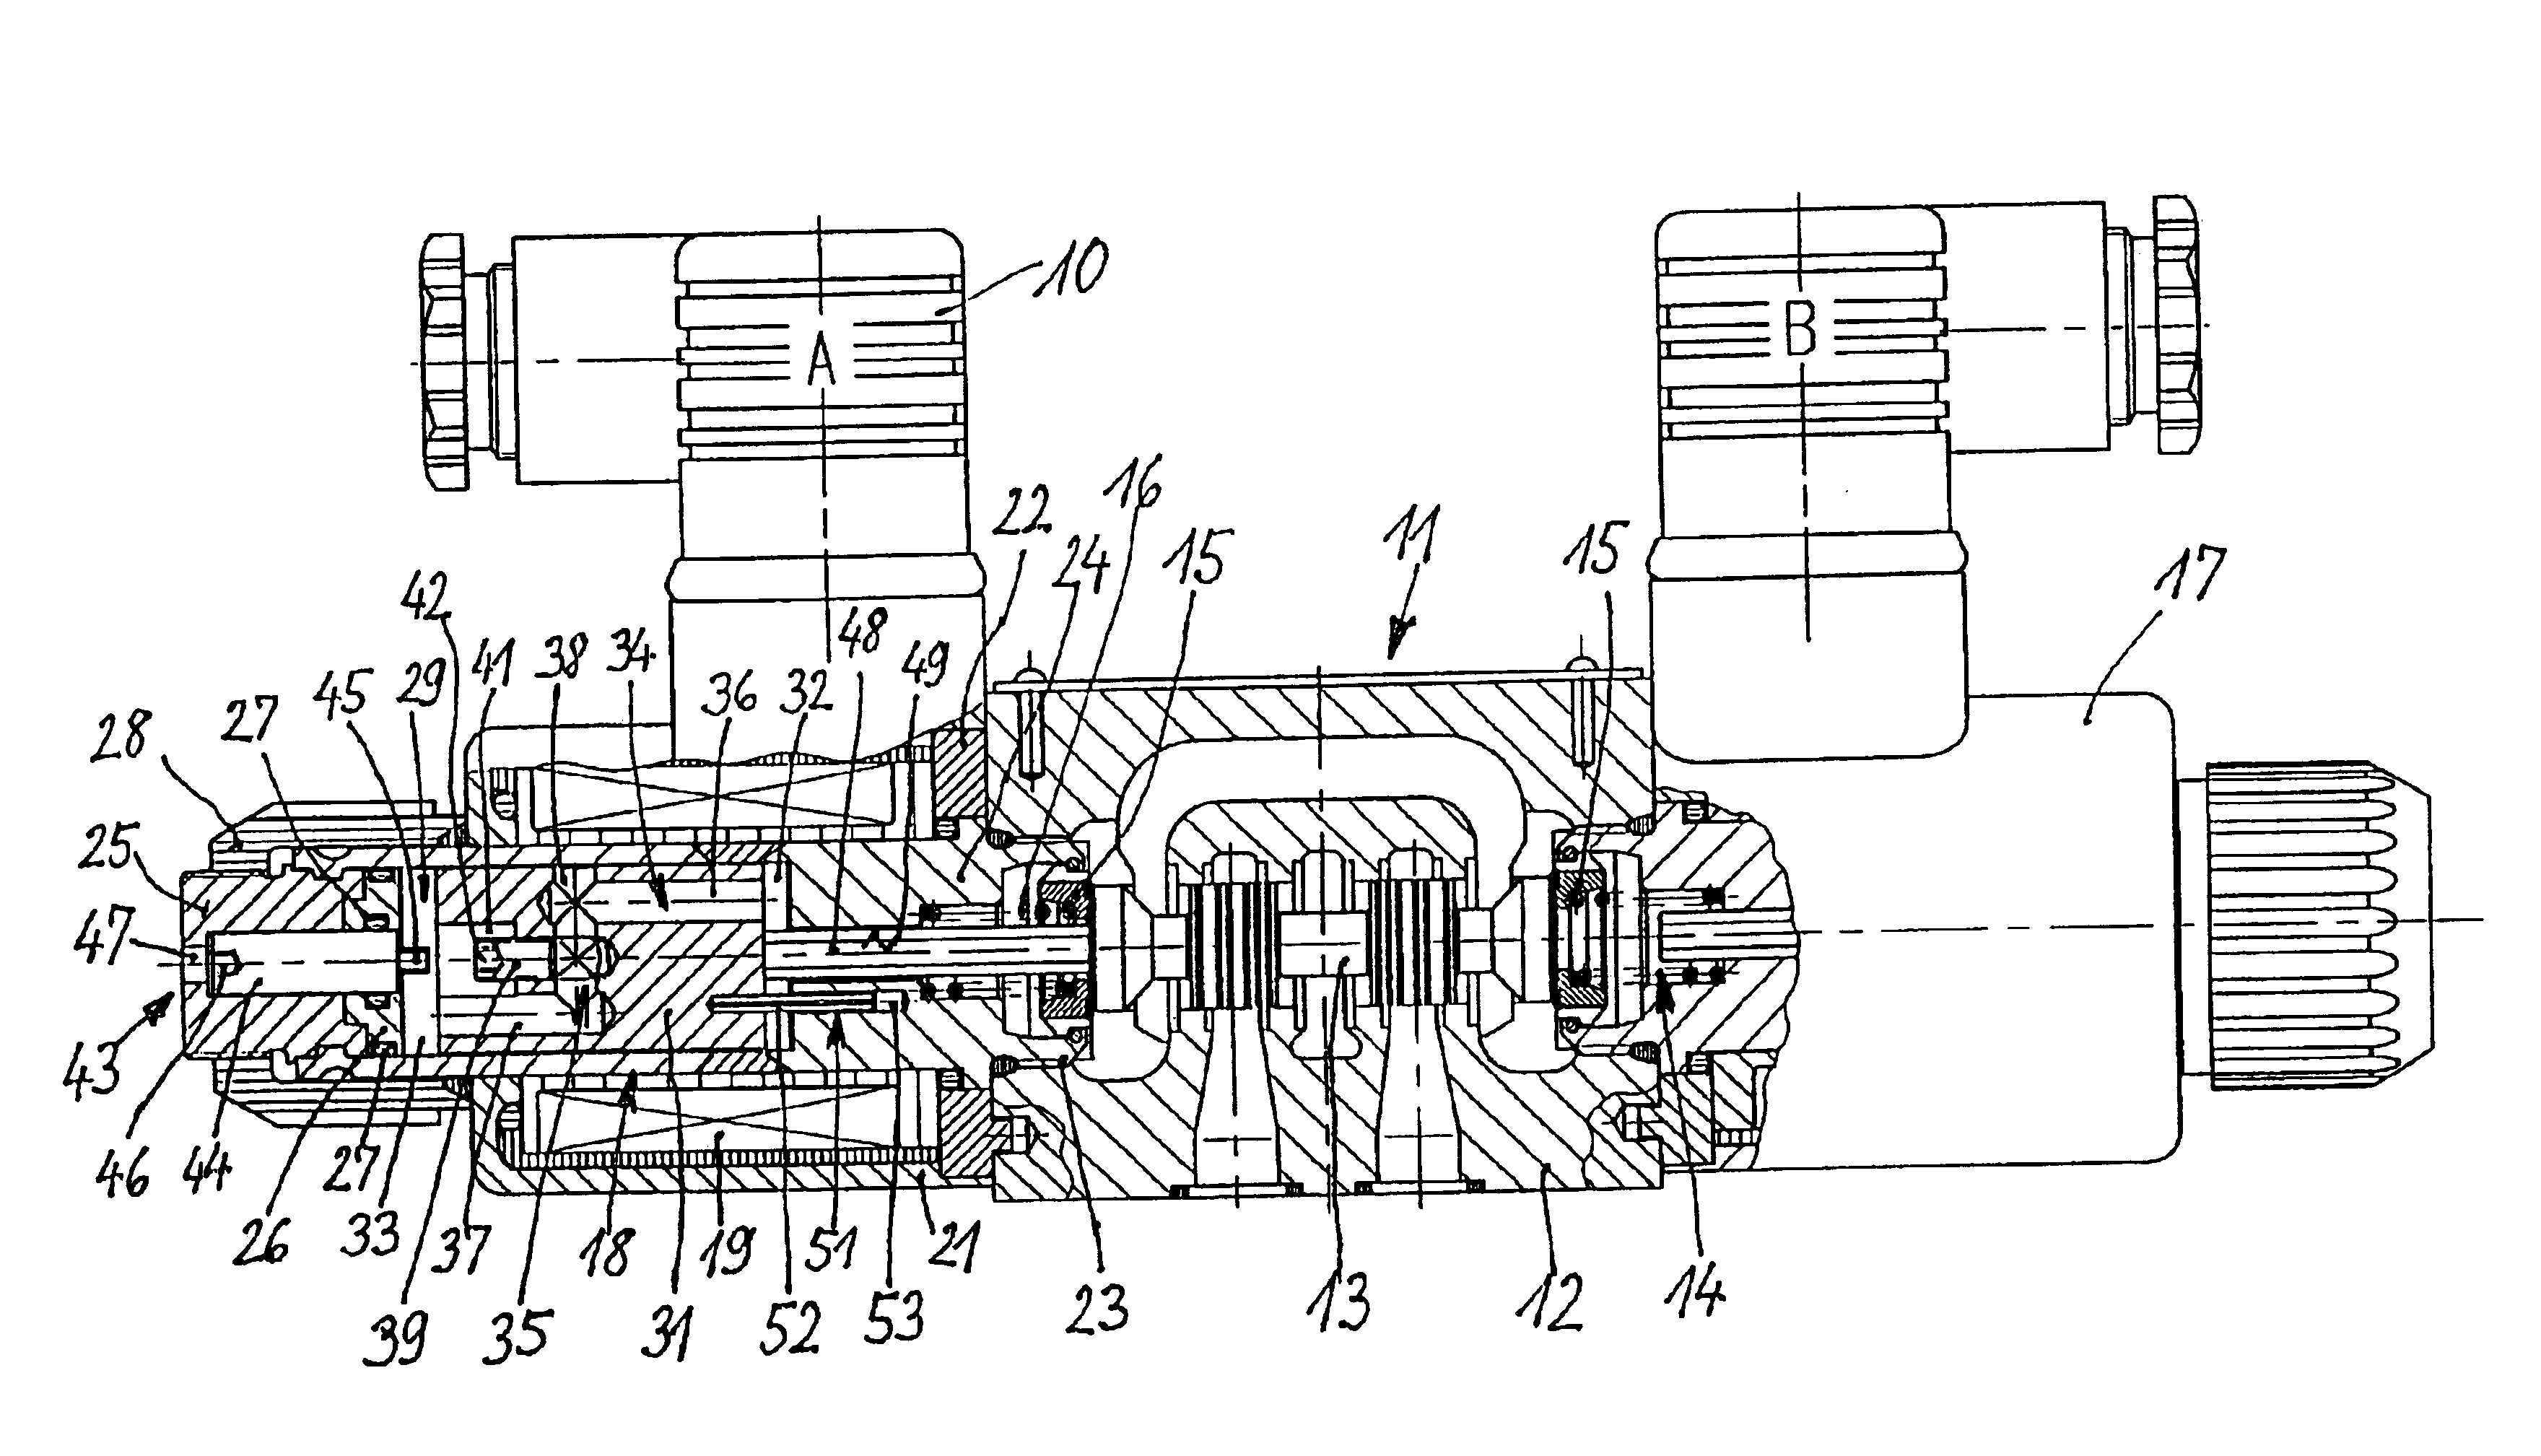 Electromagnet for actuating a hydraulic valve